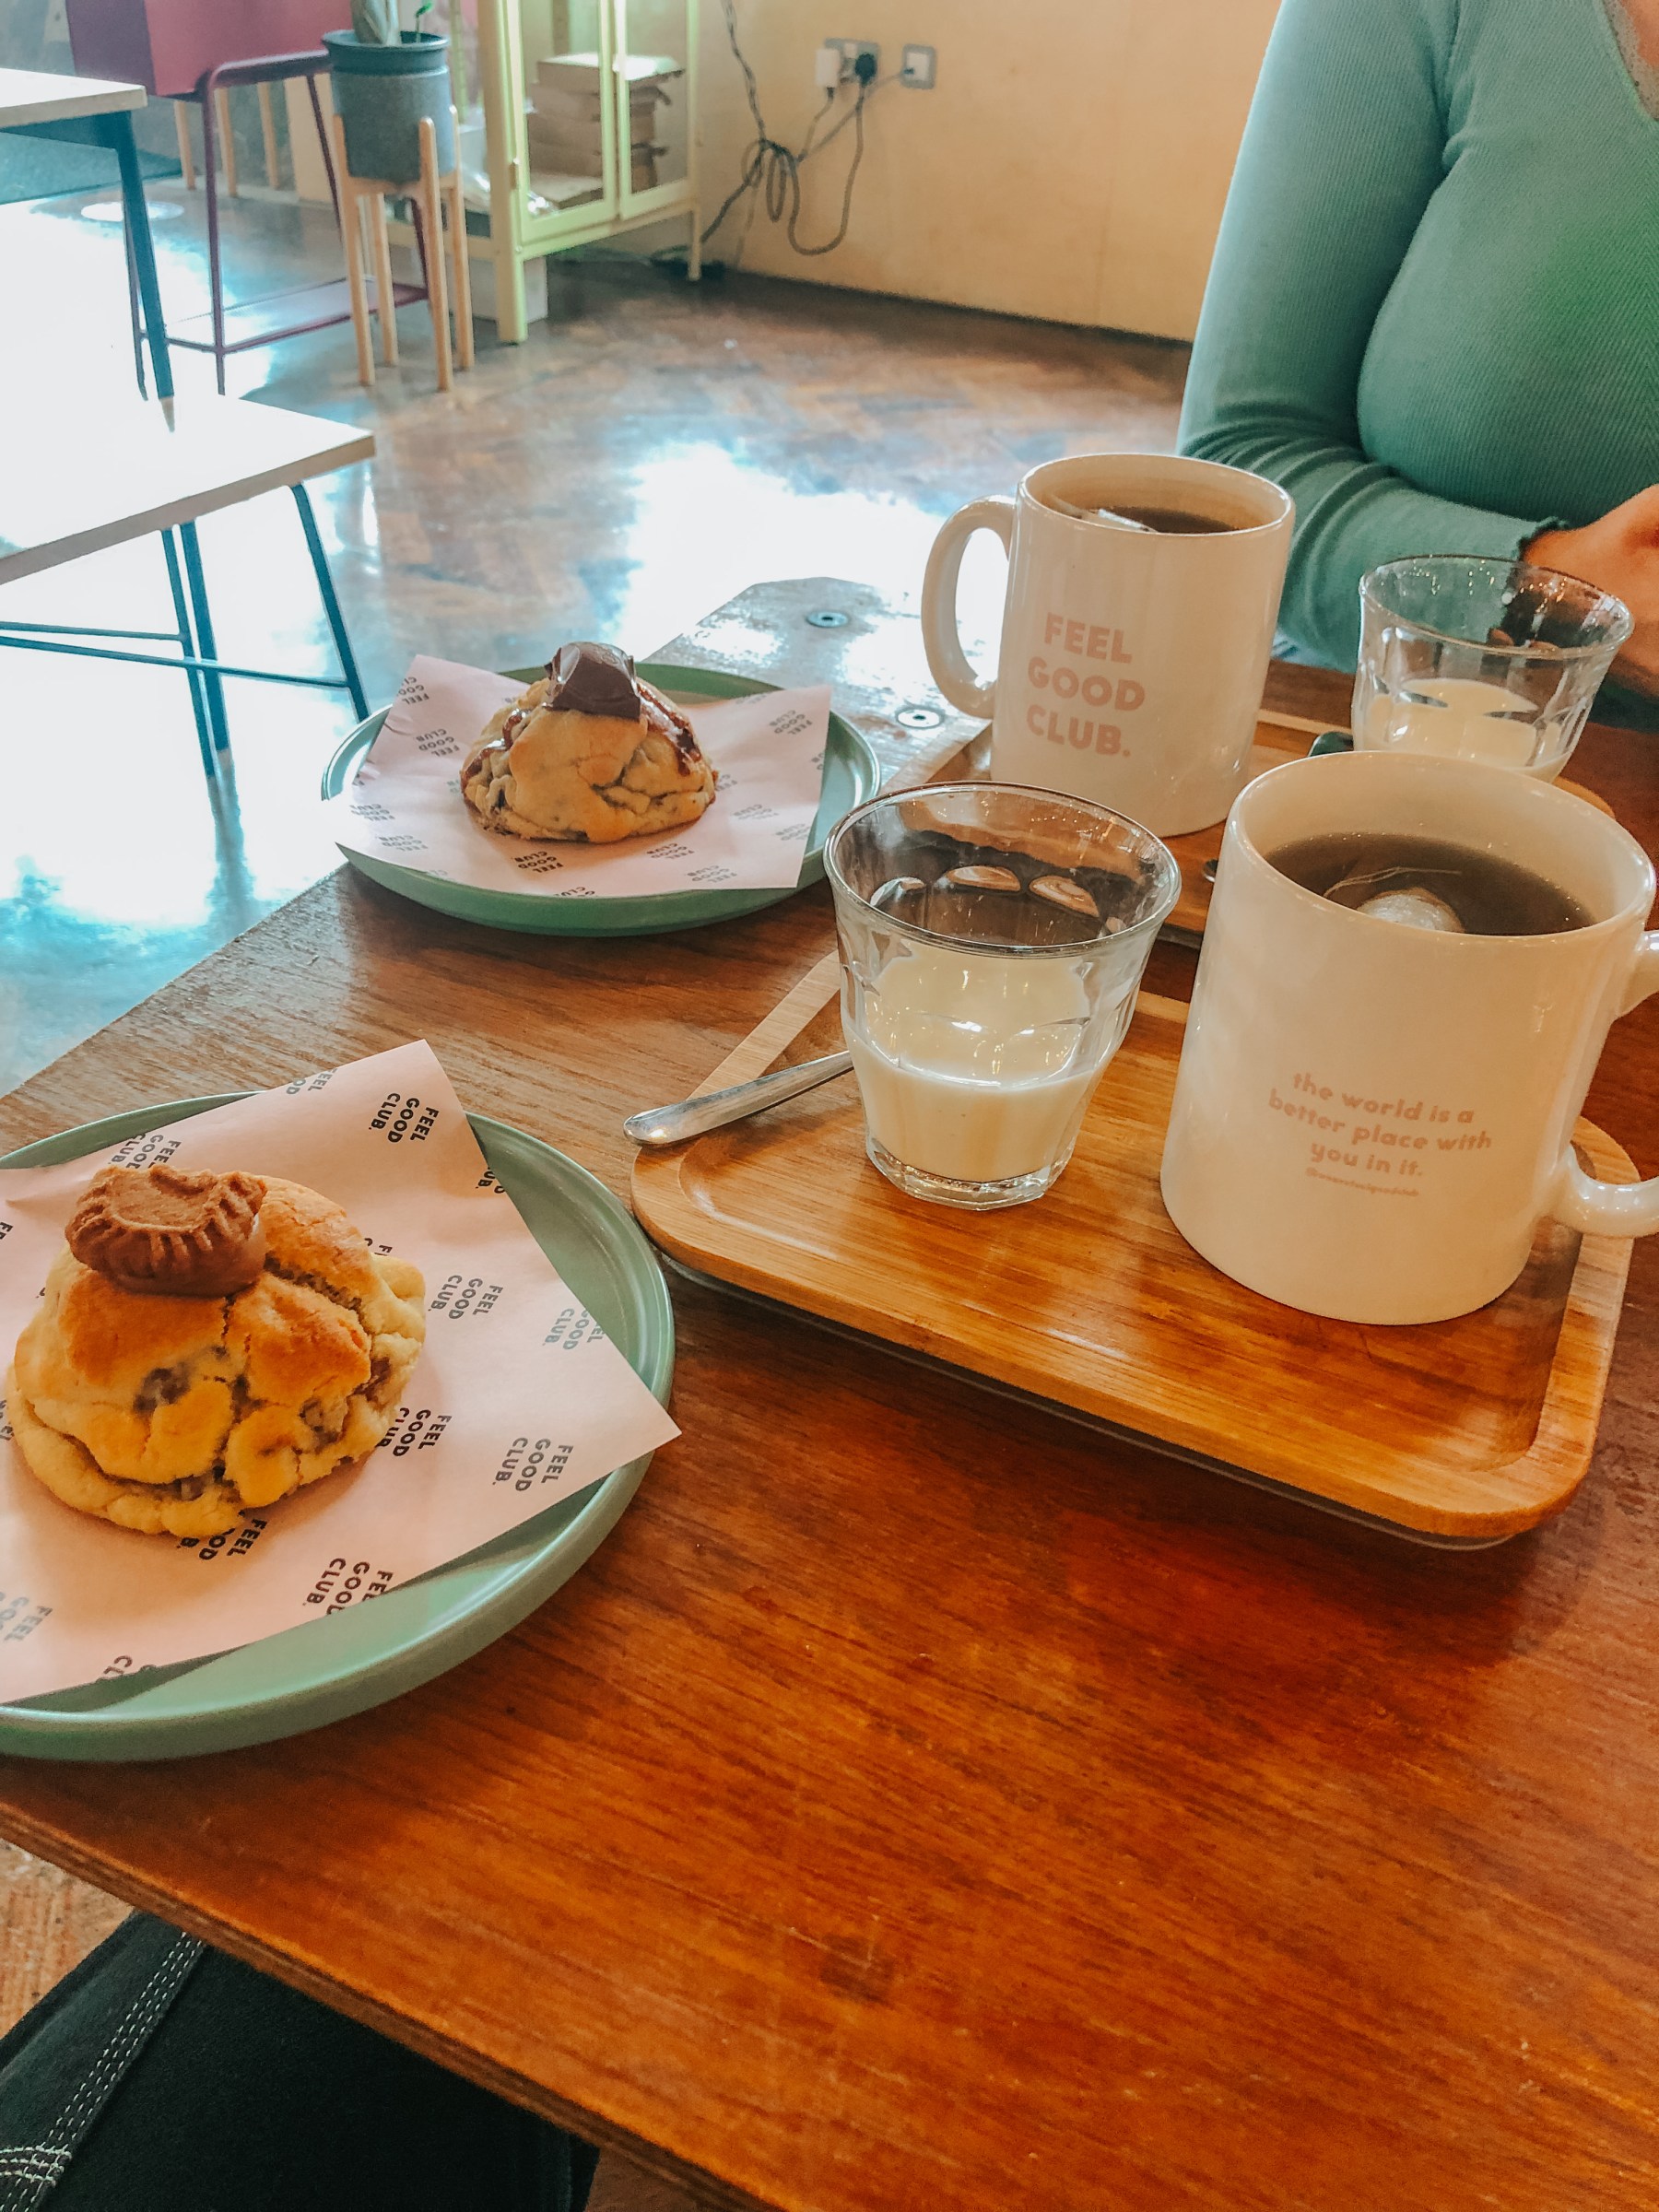 Tea and stuffed cookies at the feel good club in Manchester